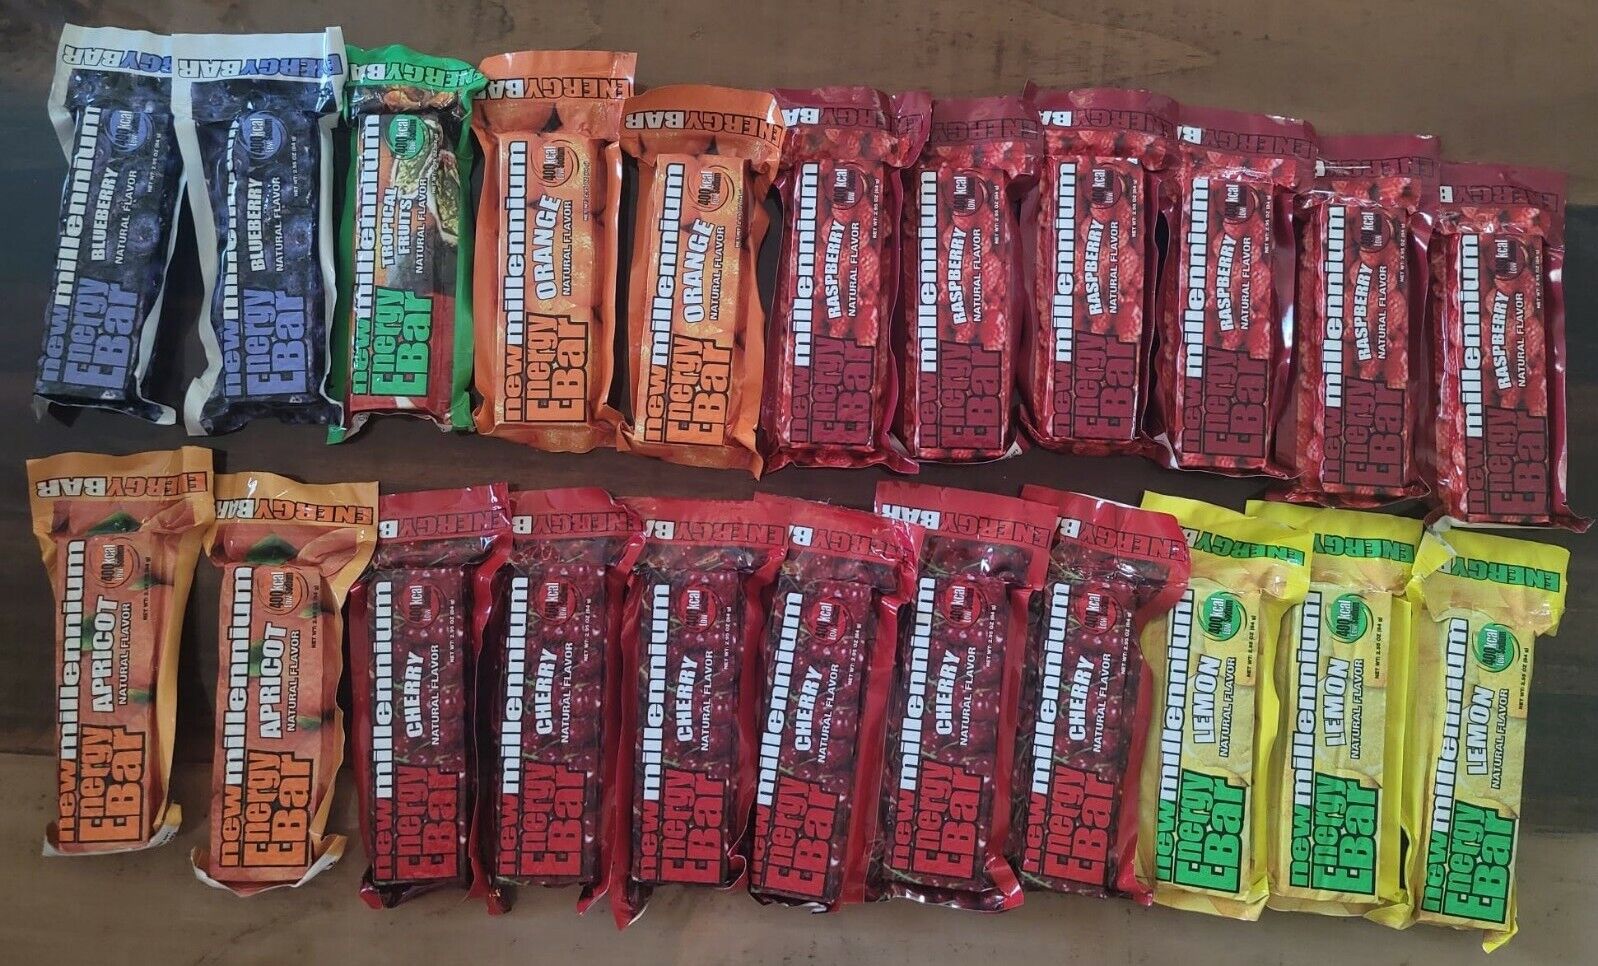 22 Meal Variety Pack of Emergency Camping Survival MRE Food Energy Bar Rations SOS Food Labs Does Not Apply